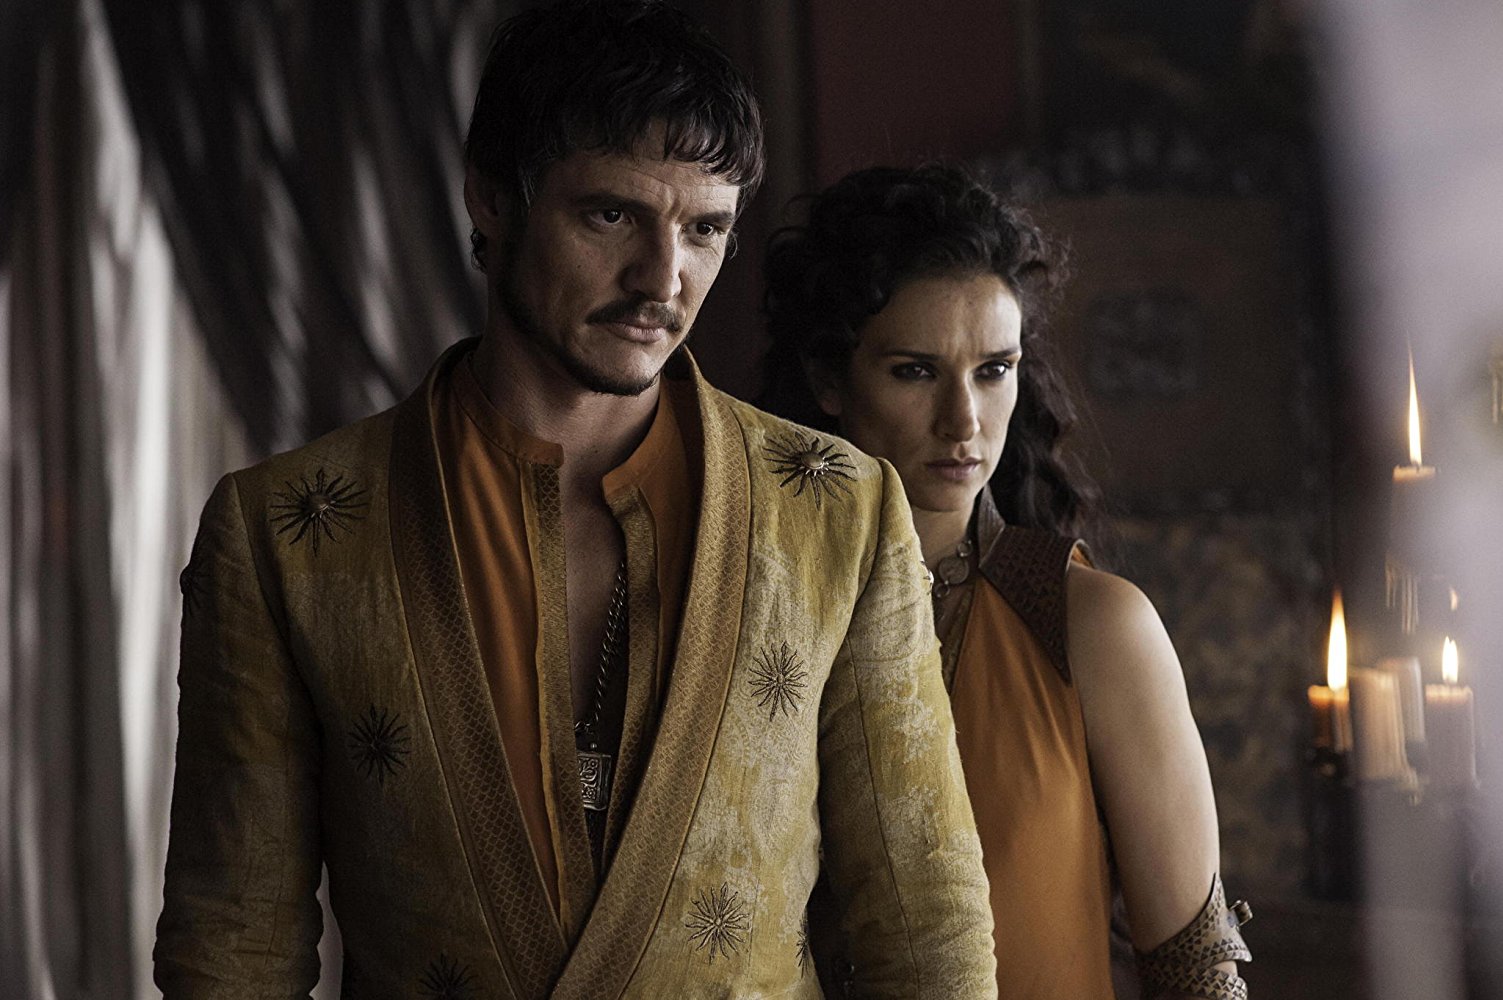 Pedro Pascal to star in Star Wars' The Mandalorian on Disney+